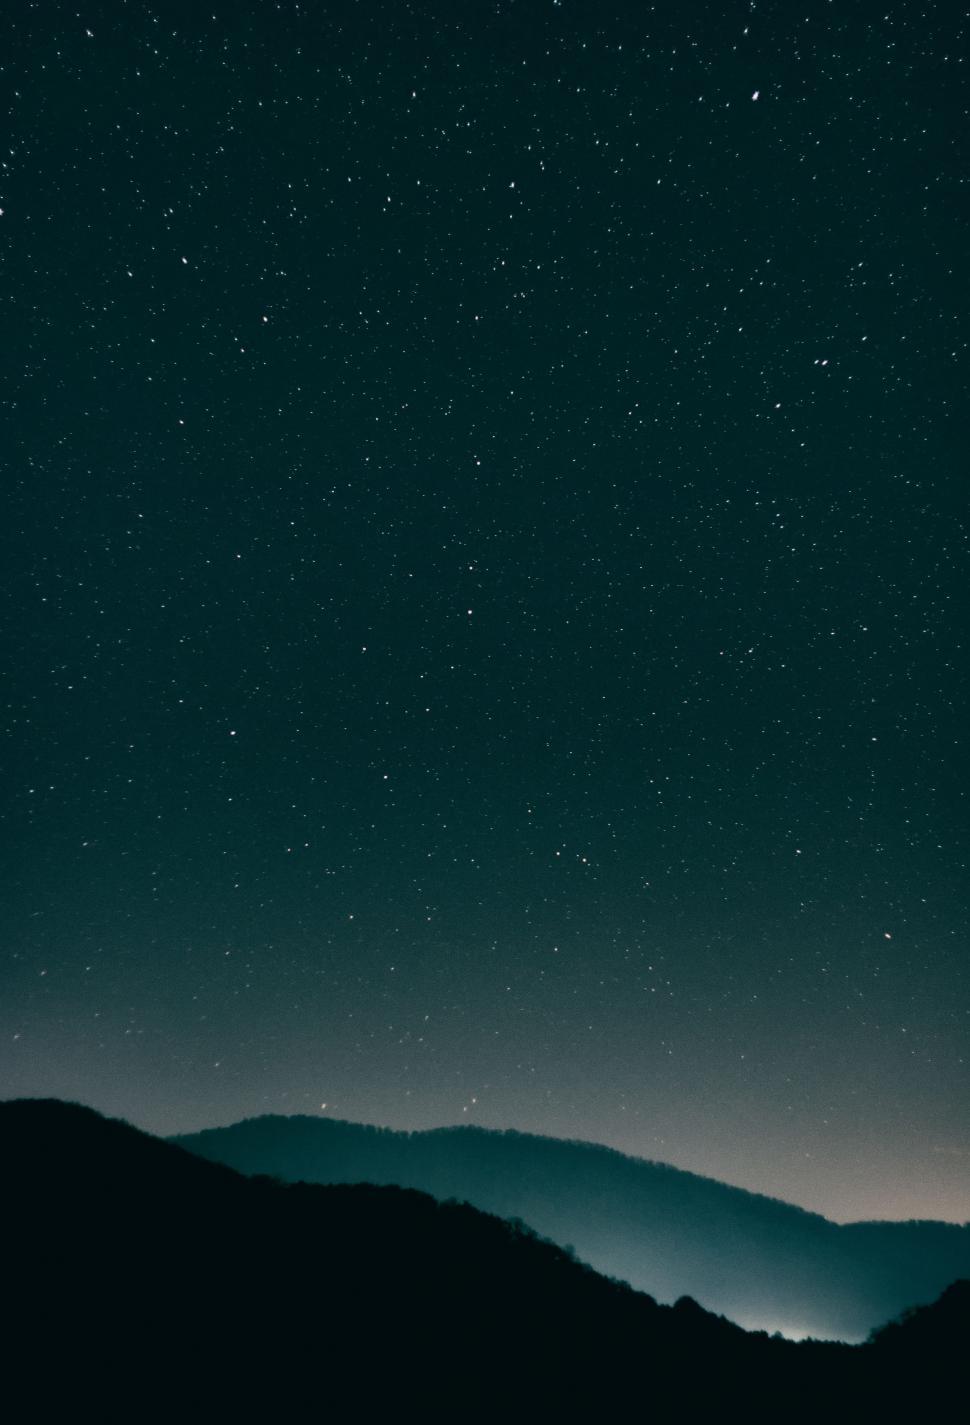 Free Image of Majestic Night Sky With Stars Above a Mountain Range 